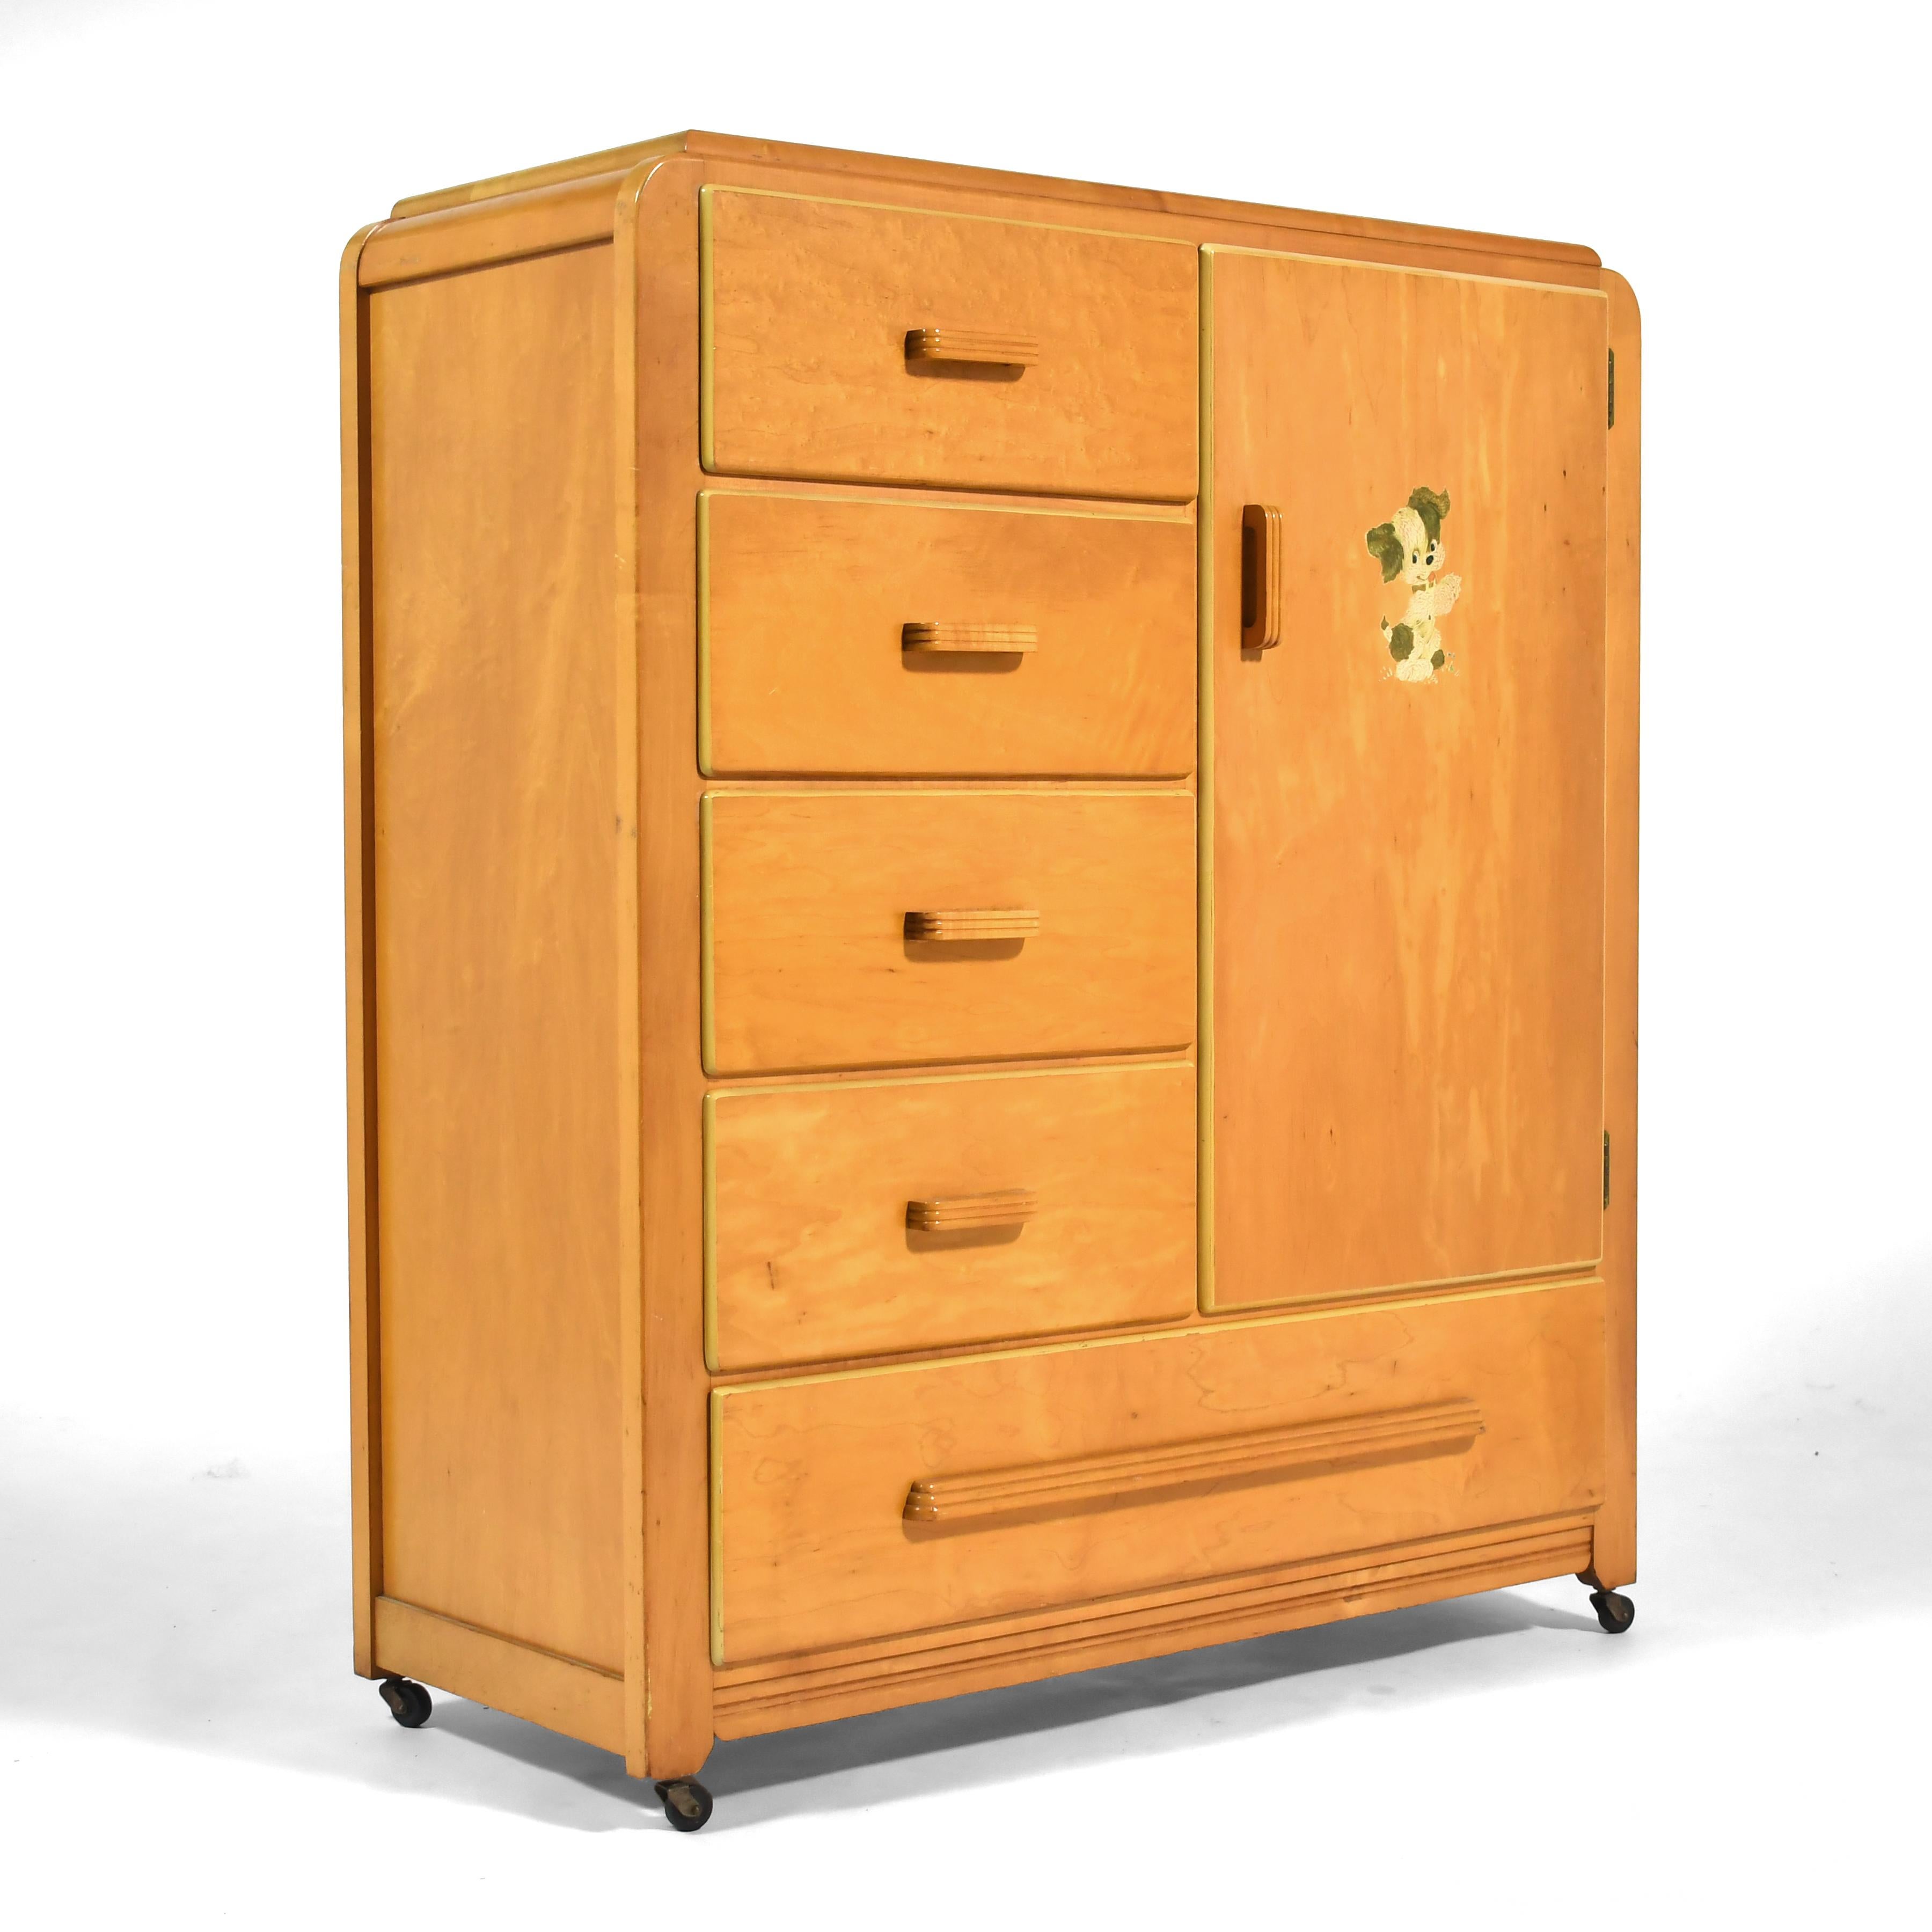 This lovely little child's armoire in maple by Edison Little Folks has handsome deco style detailing and is highly functional with a bank of four drawers over a wide drawer and a compartment with a pull-out hanger rod. 

The decal of the puppy was